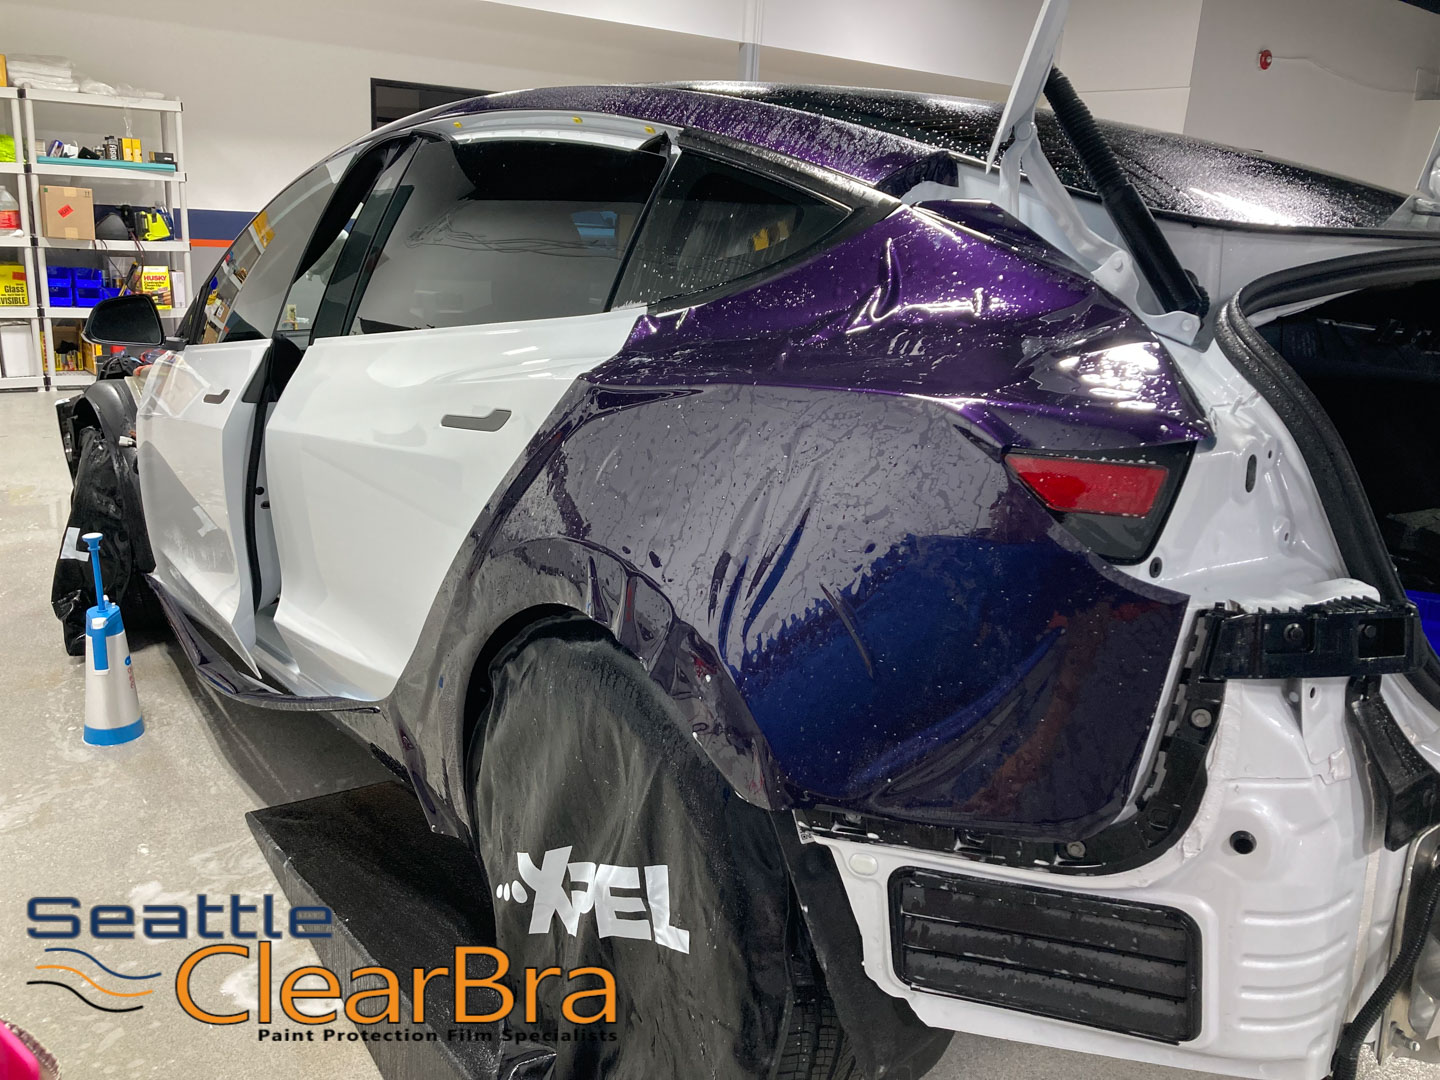 🚗 XPEL Paint Protection Film (PPF, Clear Bra)